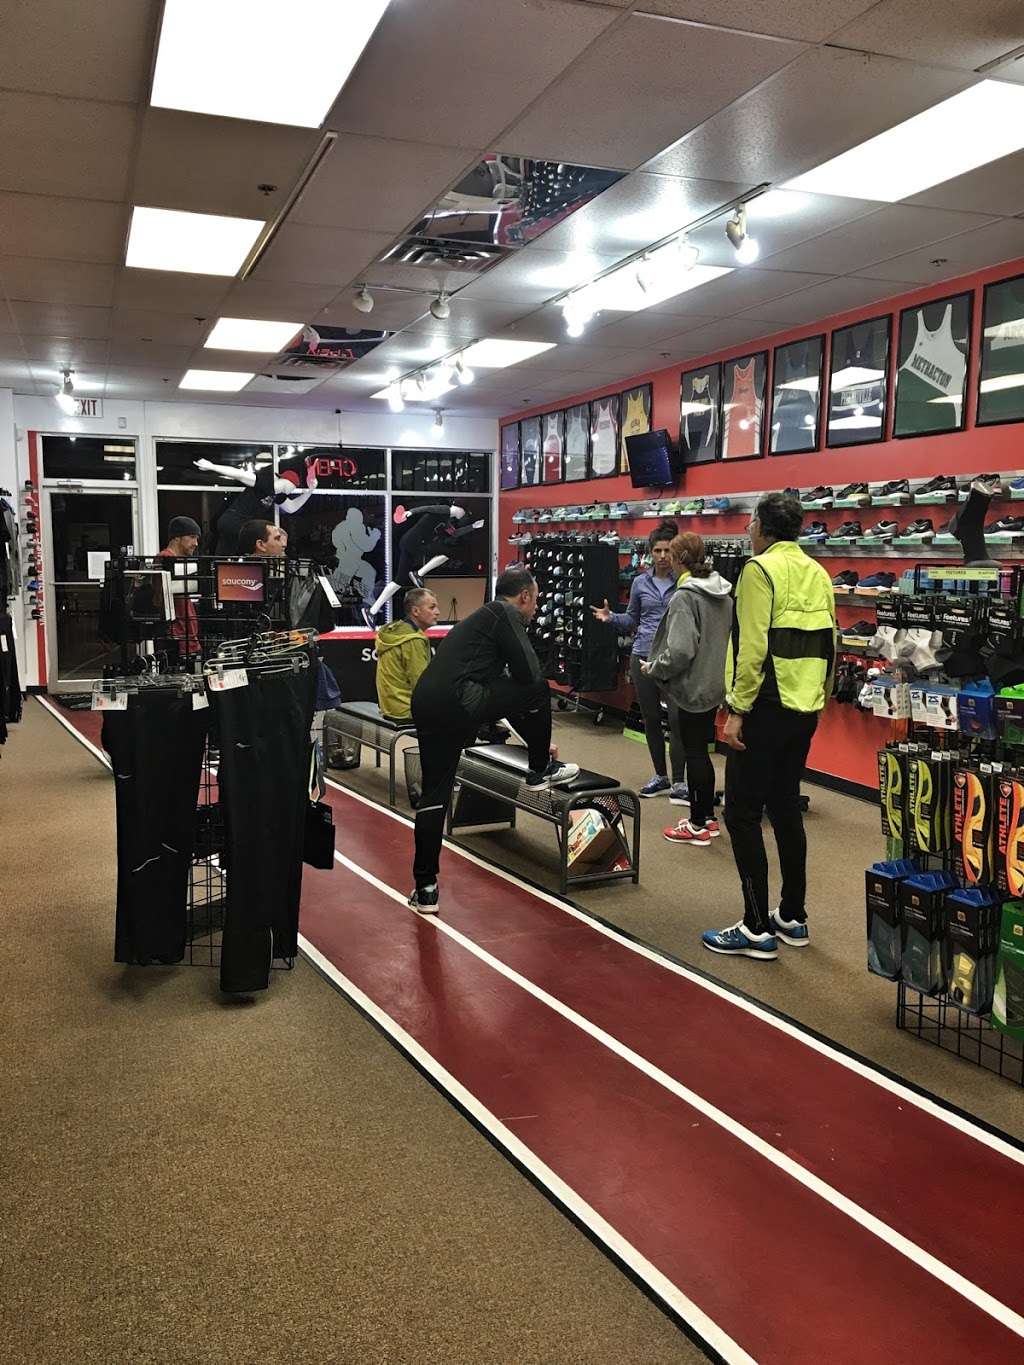 Valley Forge Running Co | 305 2nd Ave, Collegeville, PA 19426 | Phone: (610) 489-8090